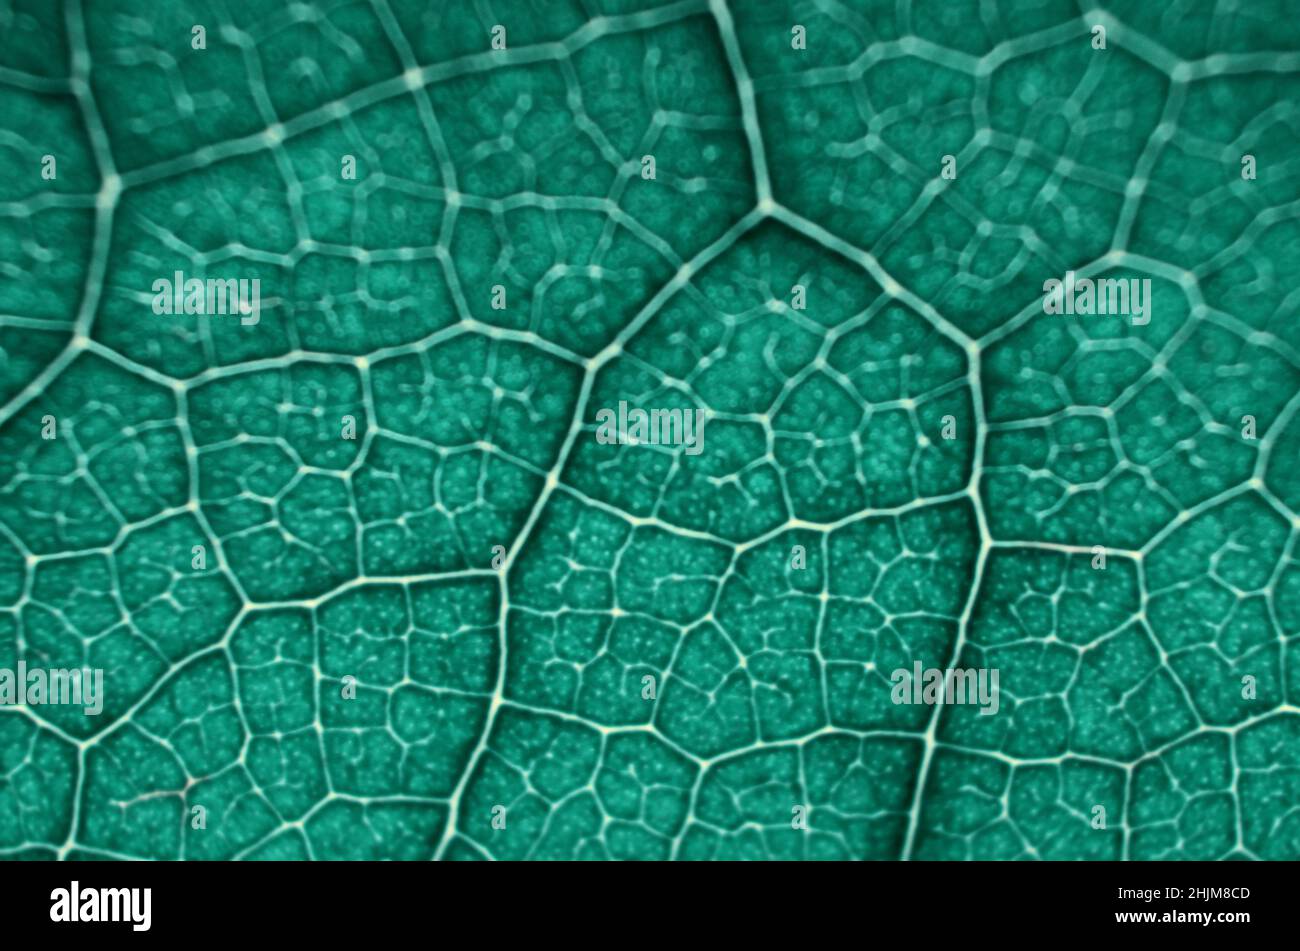 Macro defocused image of green leaf texture. Can be used as green abstract background with copy space. Stock Photo